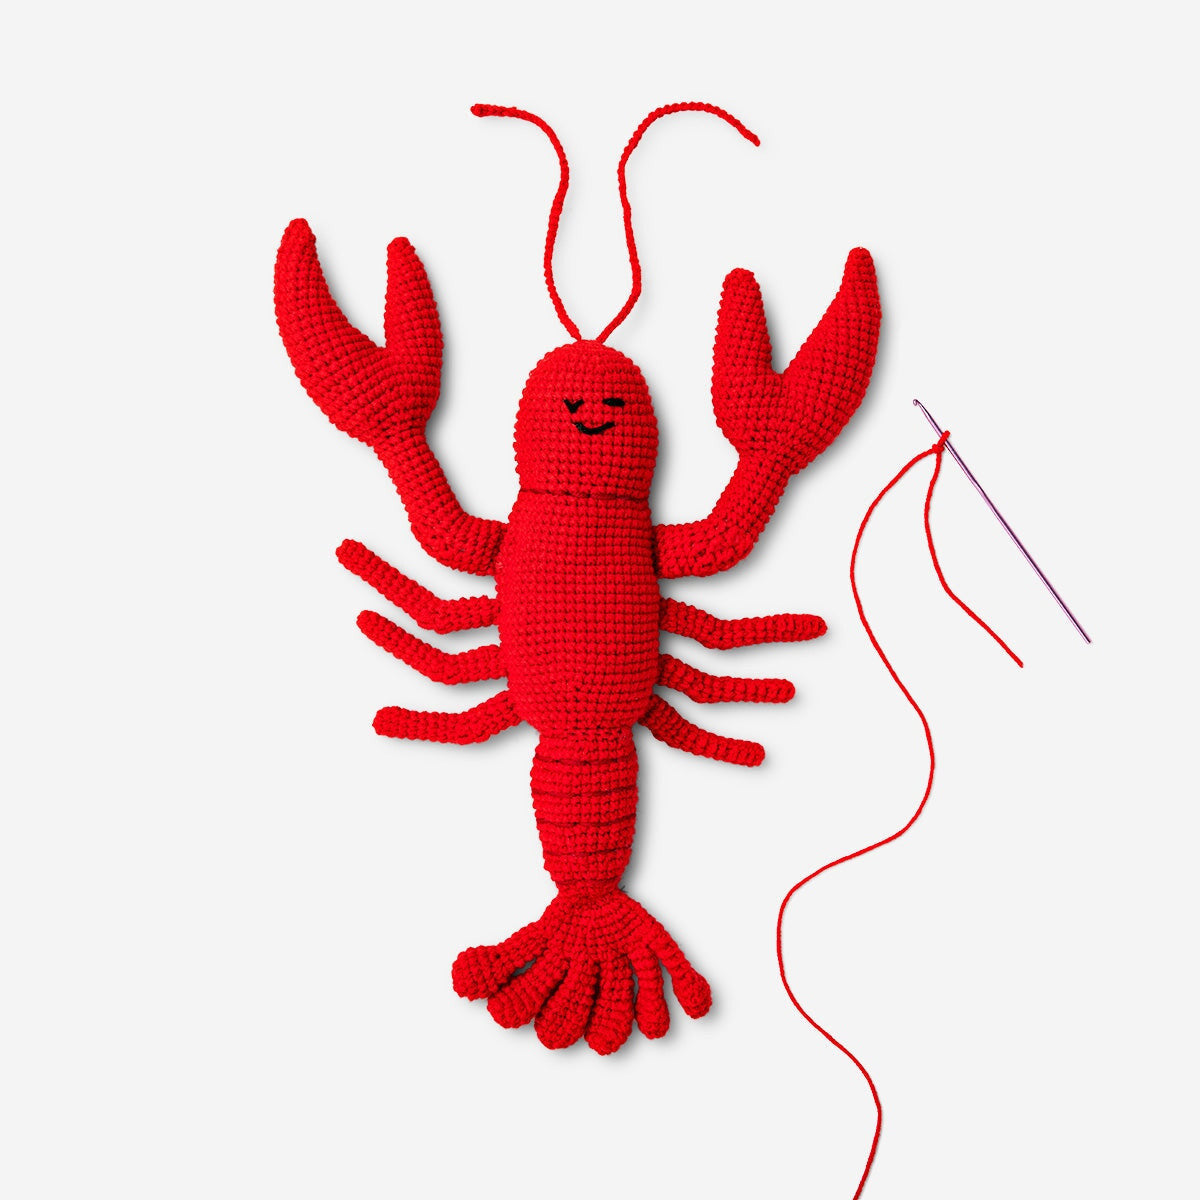 Image of Crochet-your-own lobster